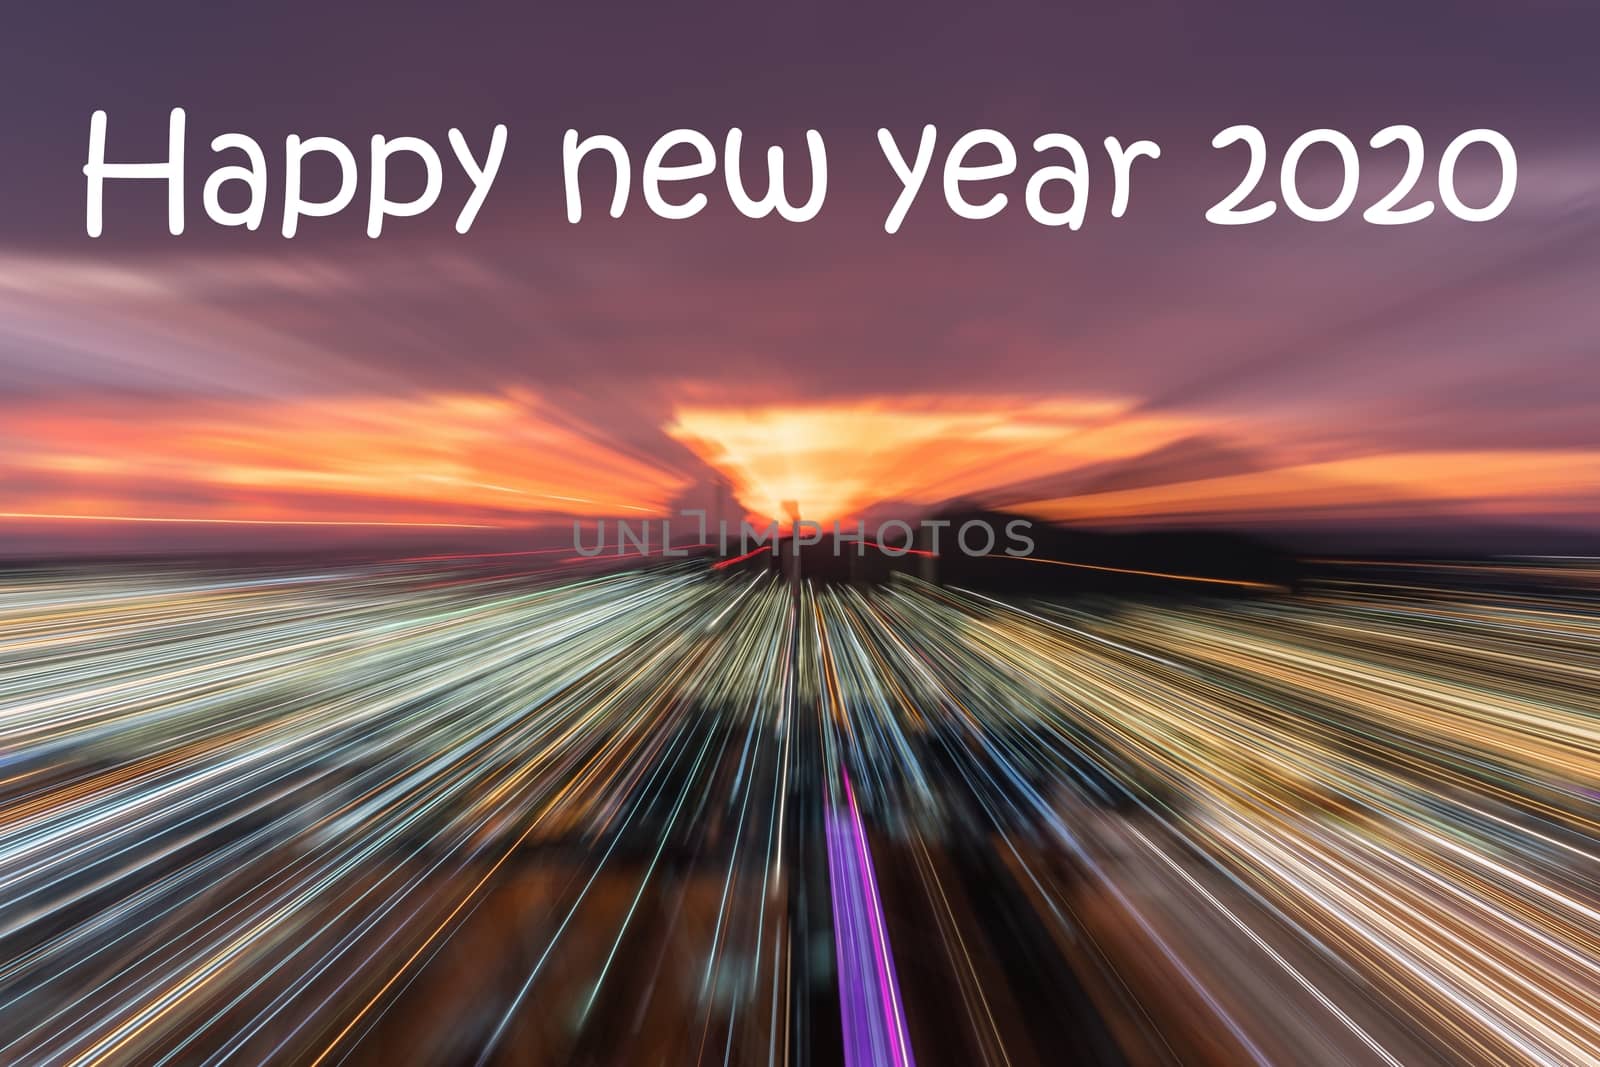 Happy new year 2020 text on Smooth Running focus to coastal city on colorful cloudy sky background in twilight time by peerapixs